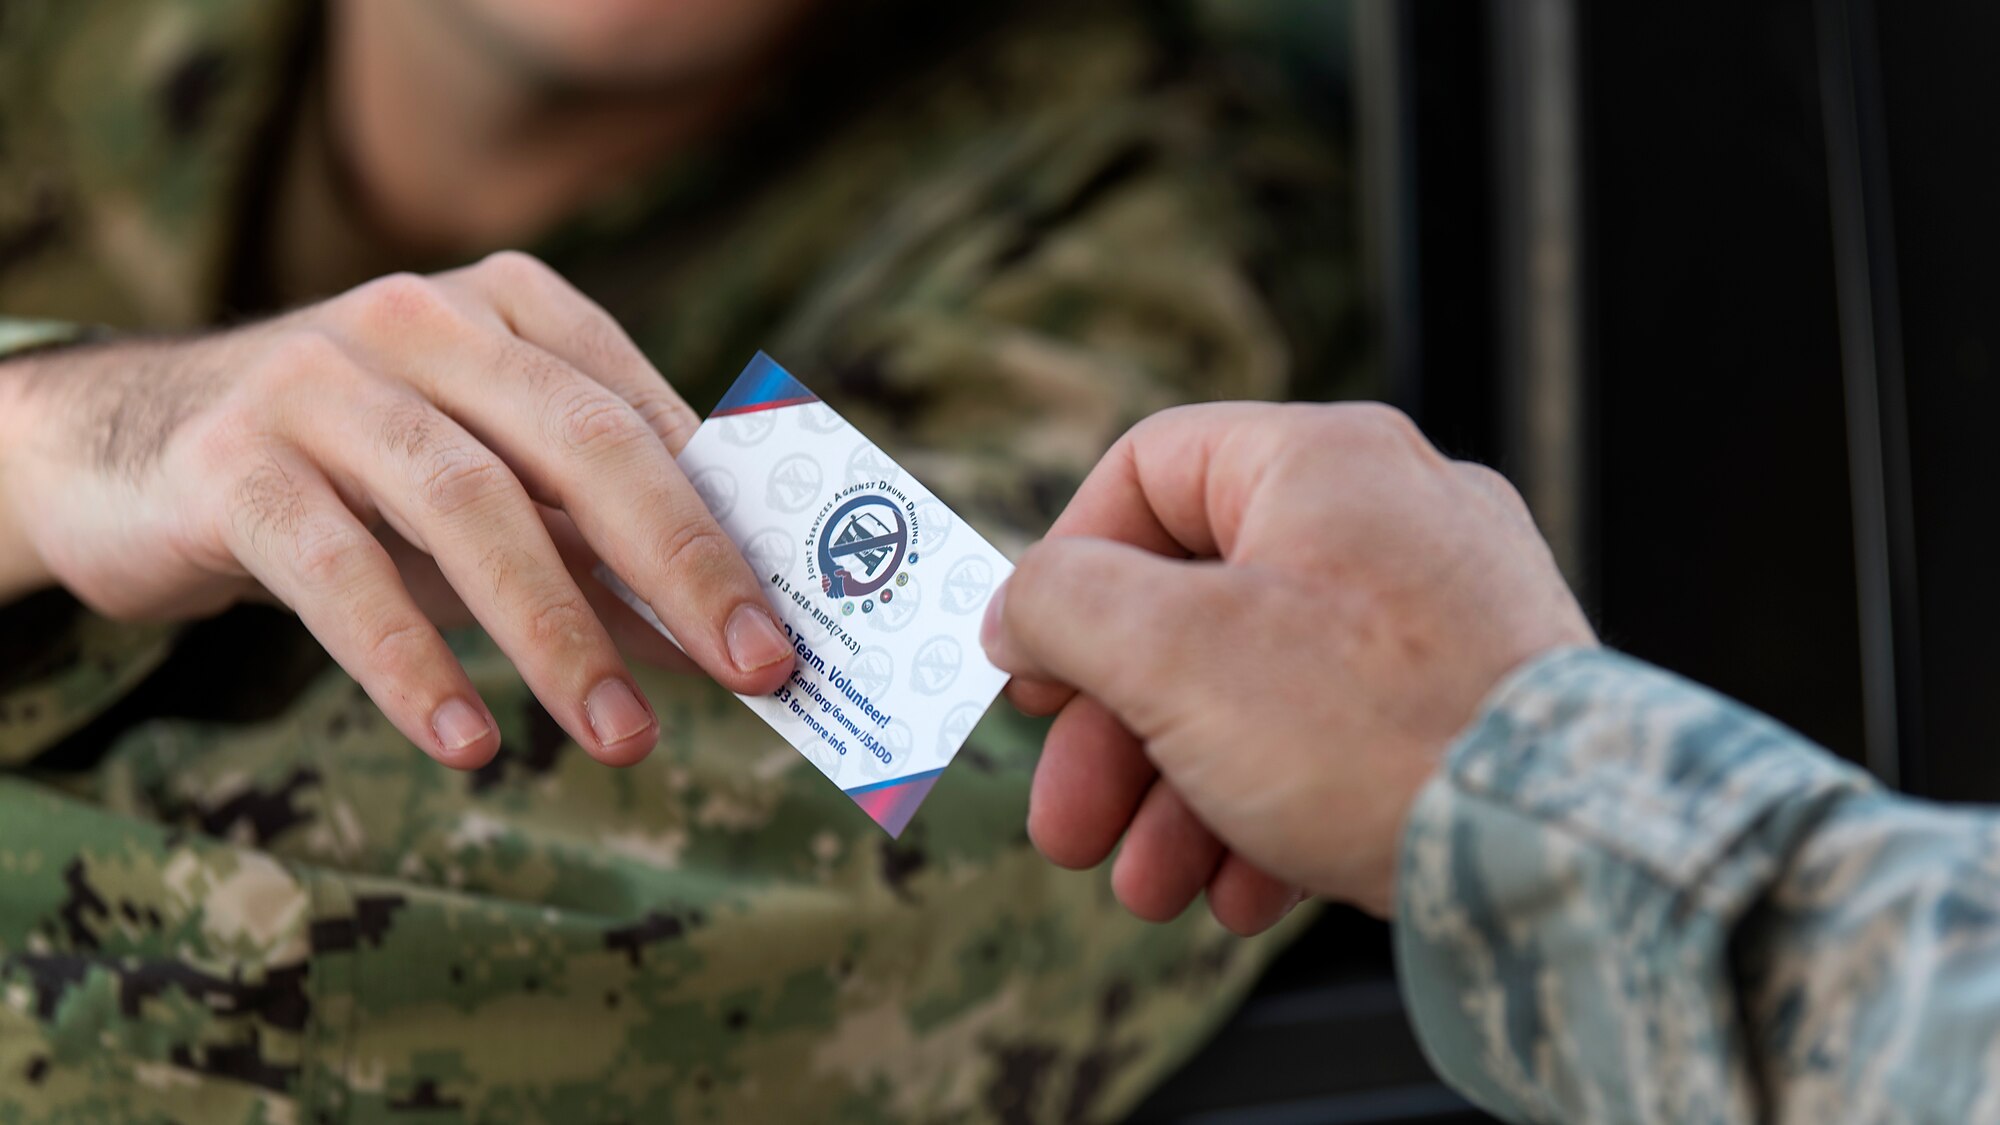 A U.S. Navy sailor takes a Joint Services Against Drunk Driving card at MacDill Air Force Base, Fla., Aug. 17, 2018. JSADD offers a free, anonymous and safe alternate mode of transportation for those who have been drinking and are unable to secure a ride home with a single phone call to 813 – 828 – RIDE (4473)